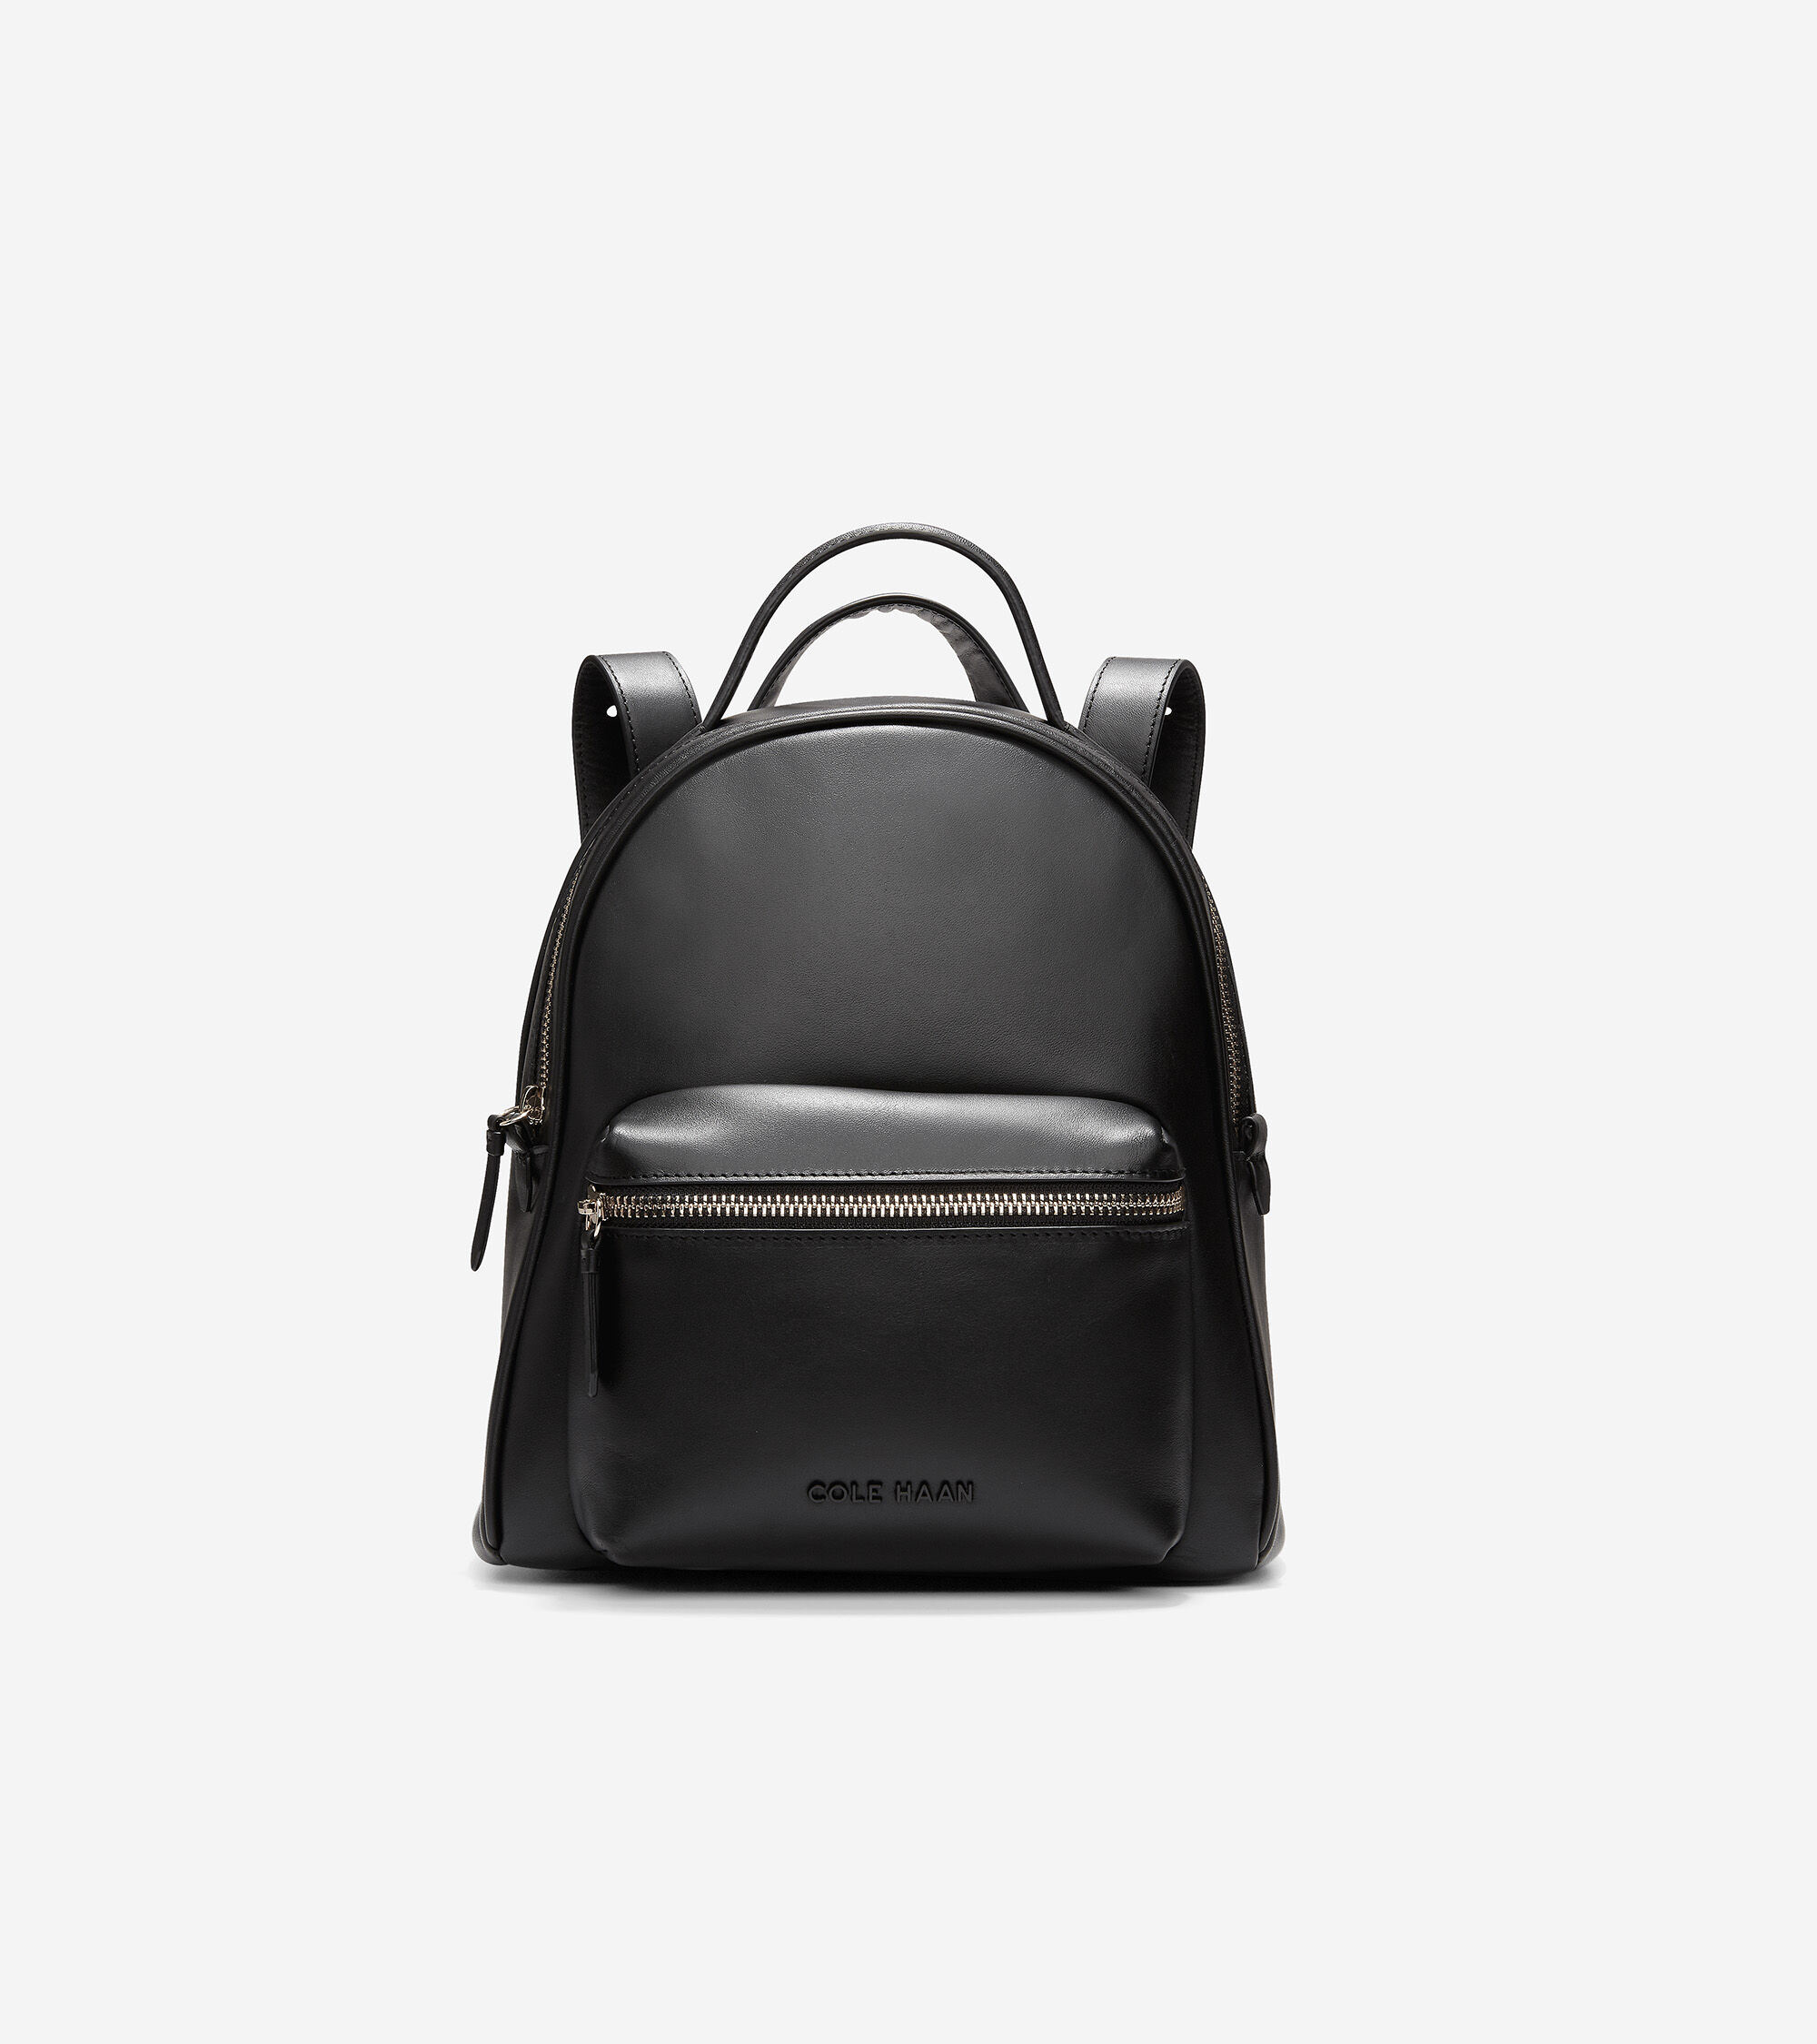 Cole Haan CHDM11026 Pebble Backpack for Men Leather, Black - Etsy